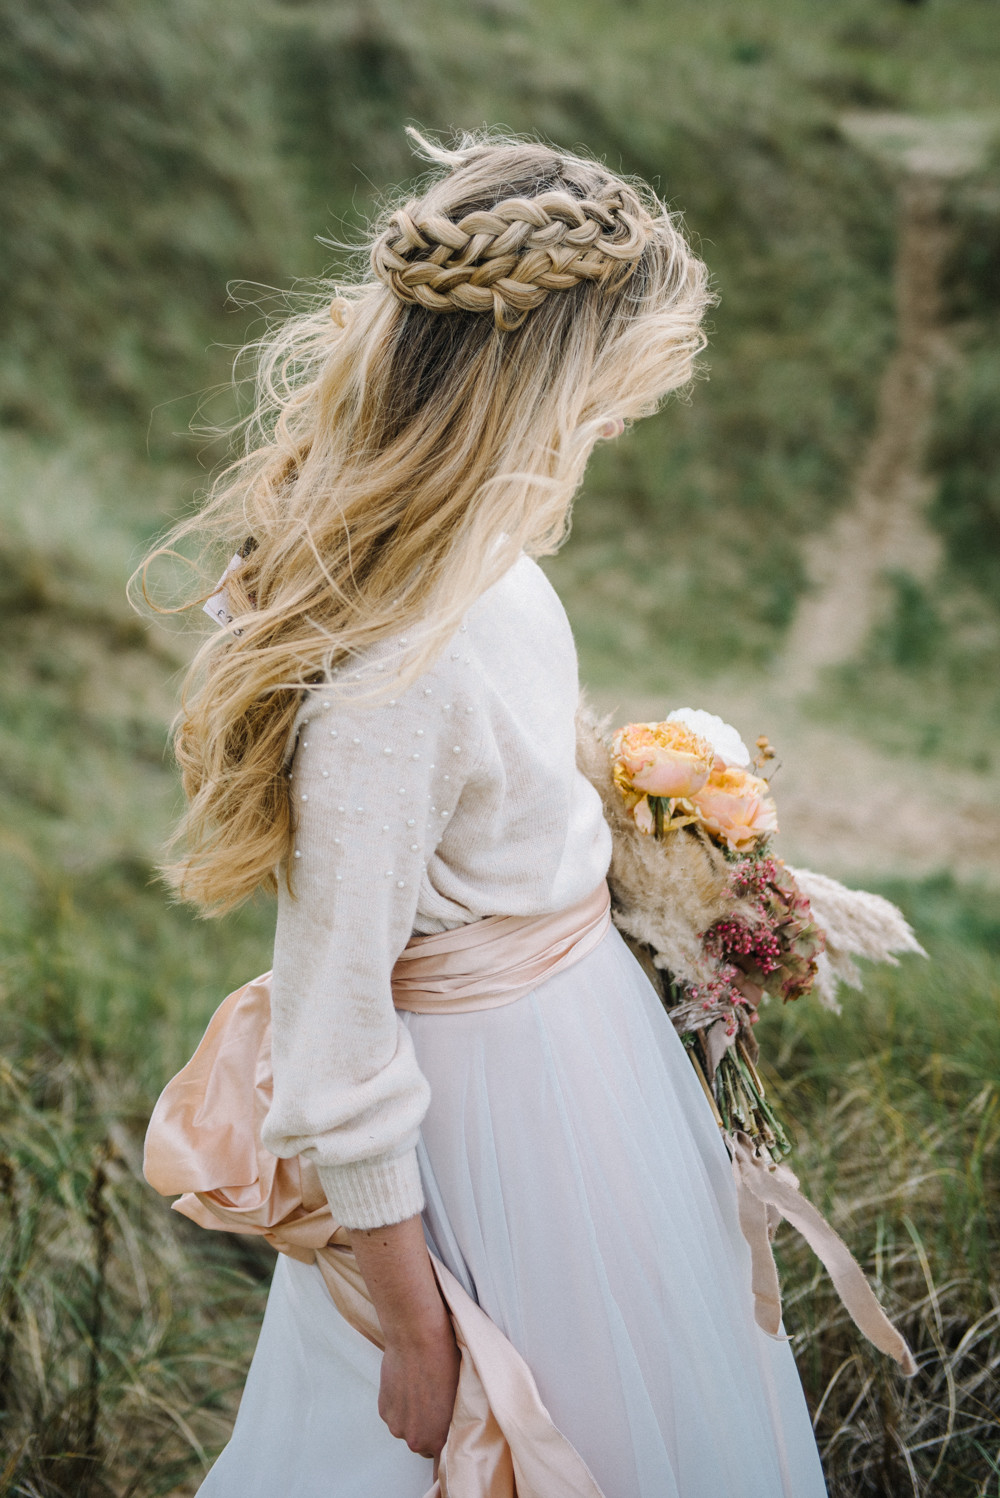 Half Up Half Down Wedding Hairstyles With Braids
 Beautiful Bridal Half Up Half Down Wedding Hair Inspiration